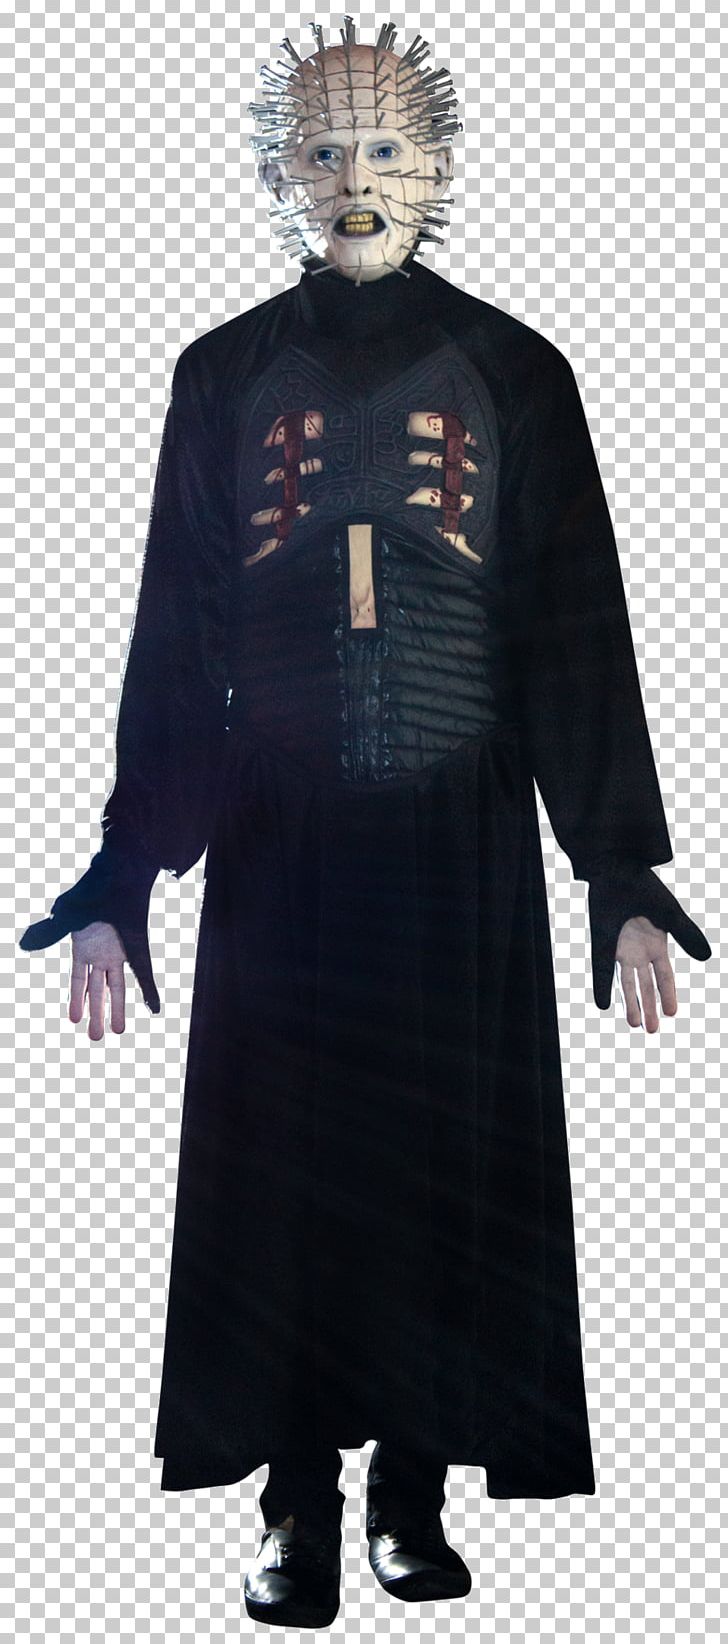 Pinhead Halloween Costume Hellraiser Costume Party PNG, Clipart, Adult, Art, Cenobite, Clothing, Cosplay Free PNG Download